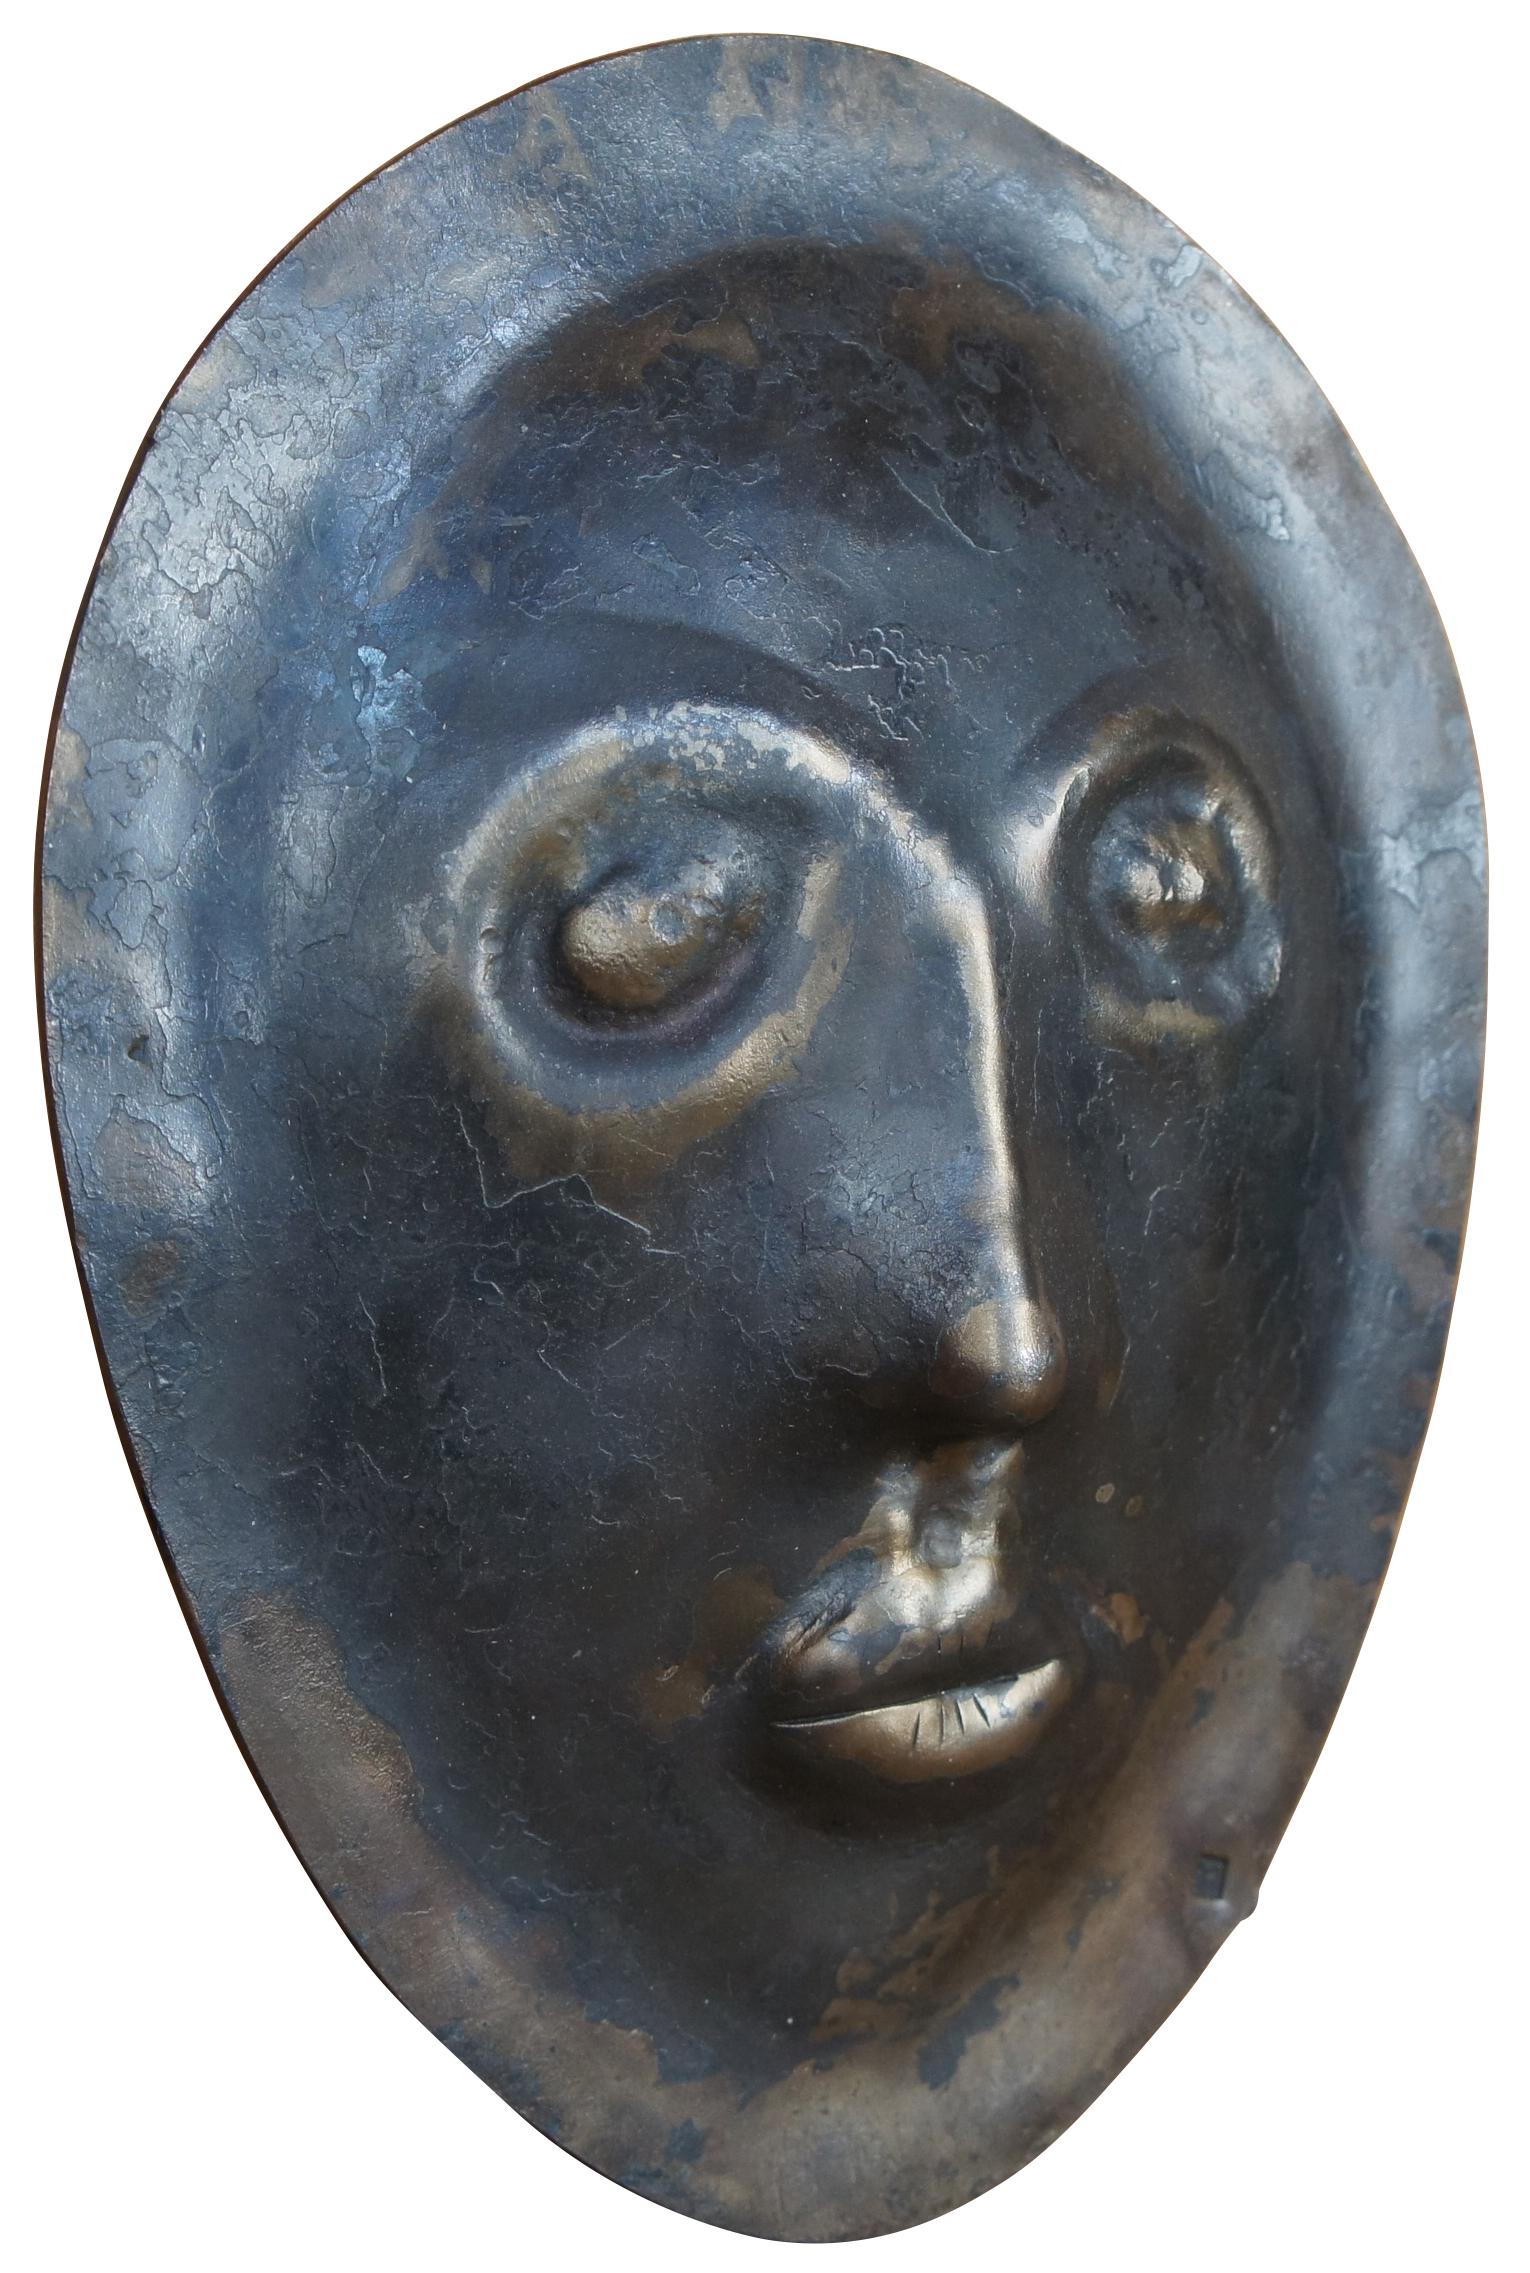 Vintage heavy iron modern art sculpture funerary mask featuring a flattened face with no expression. Stamped TM. Measure: 13